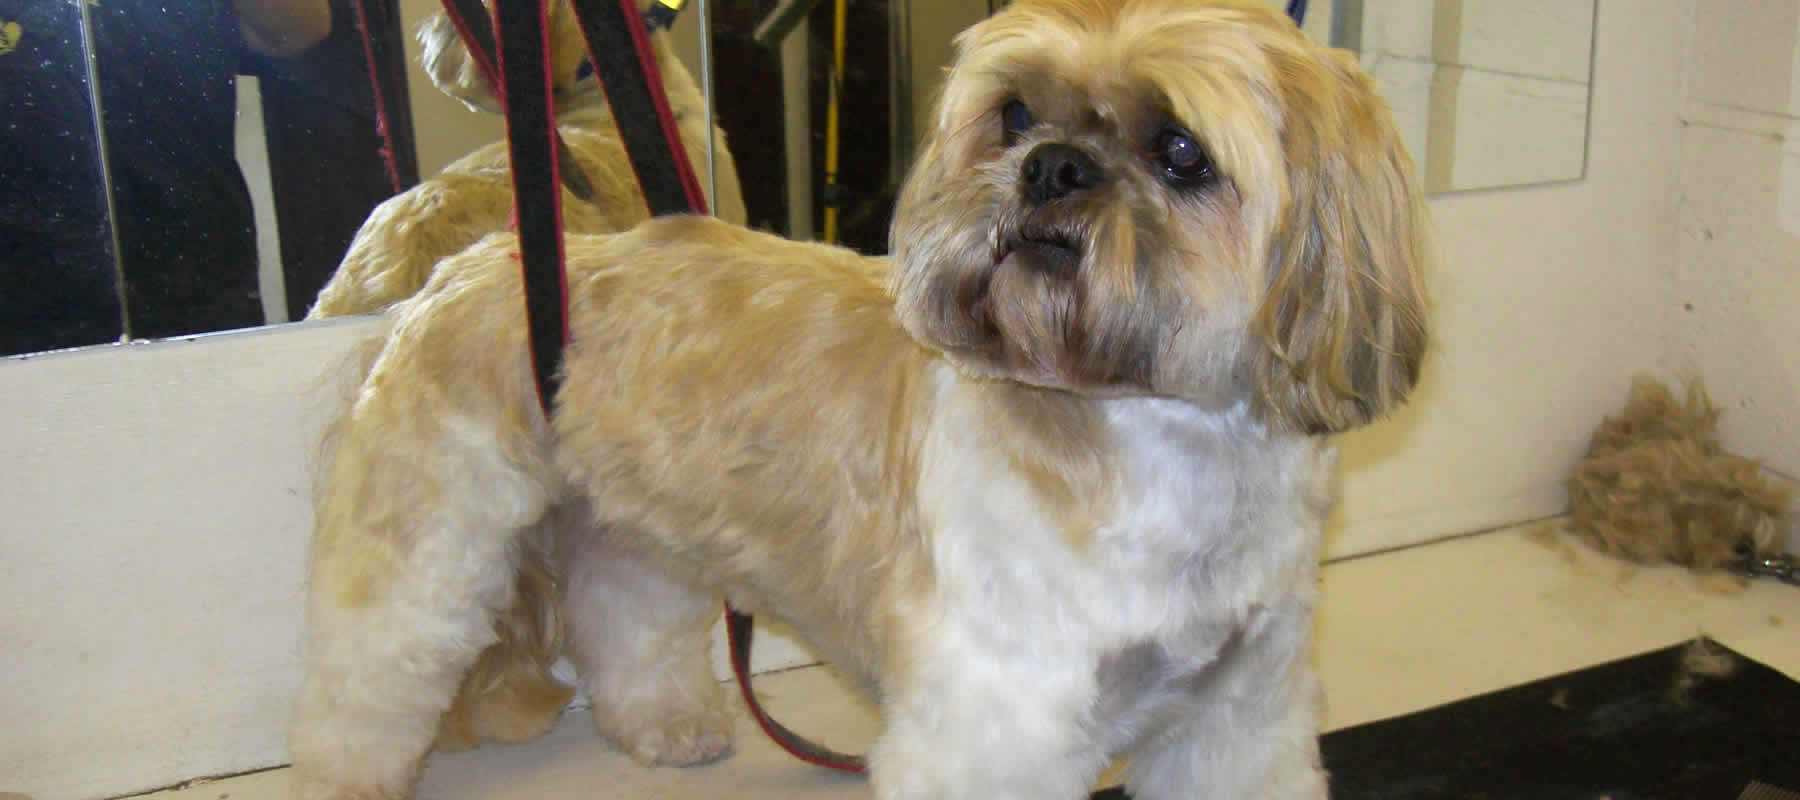 Dapper Dogs Professional Dog Grooming in Cheadle Hulme Dog Groomers Cheadle Hulme